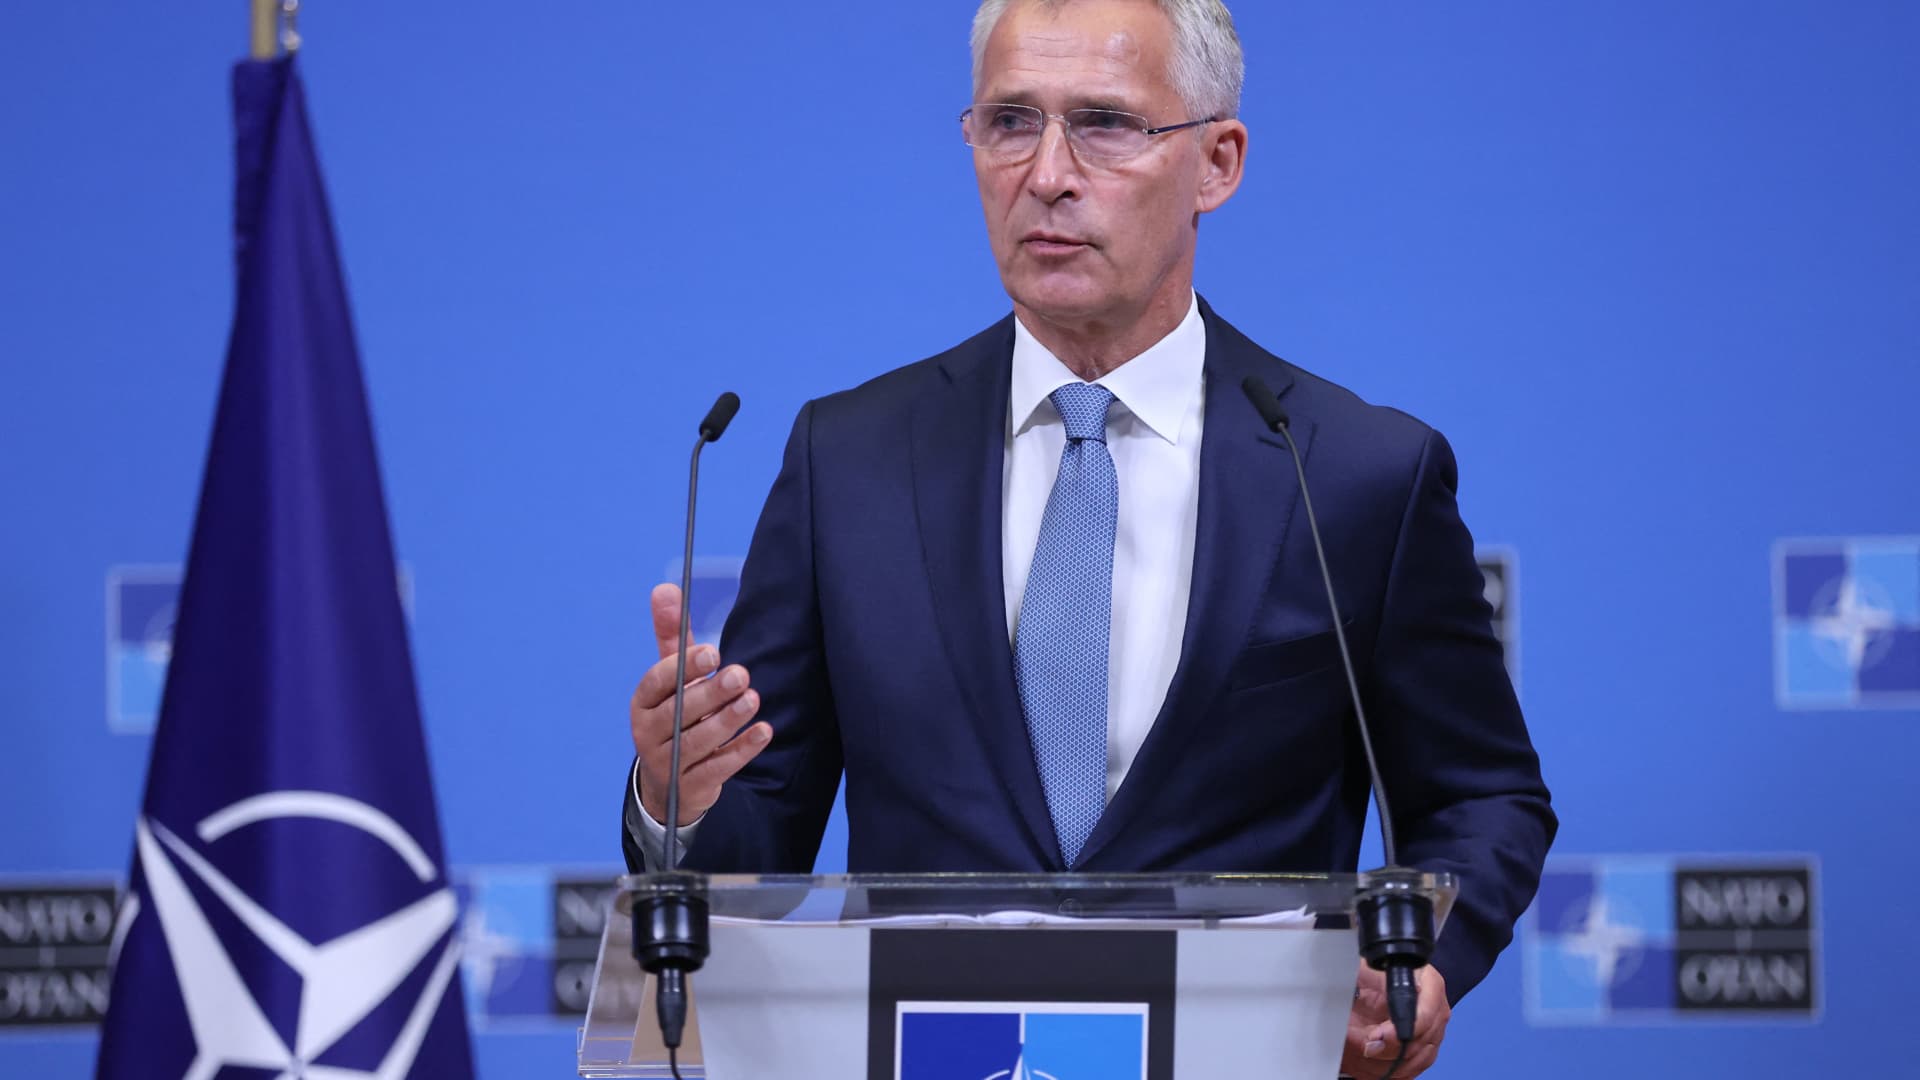 NATO Secretary General Jens Stoltenberg holds a press conference at the NATO headquarters in Brussels, on August 17 August 2022.